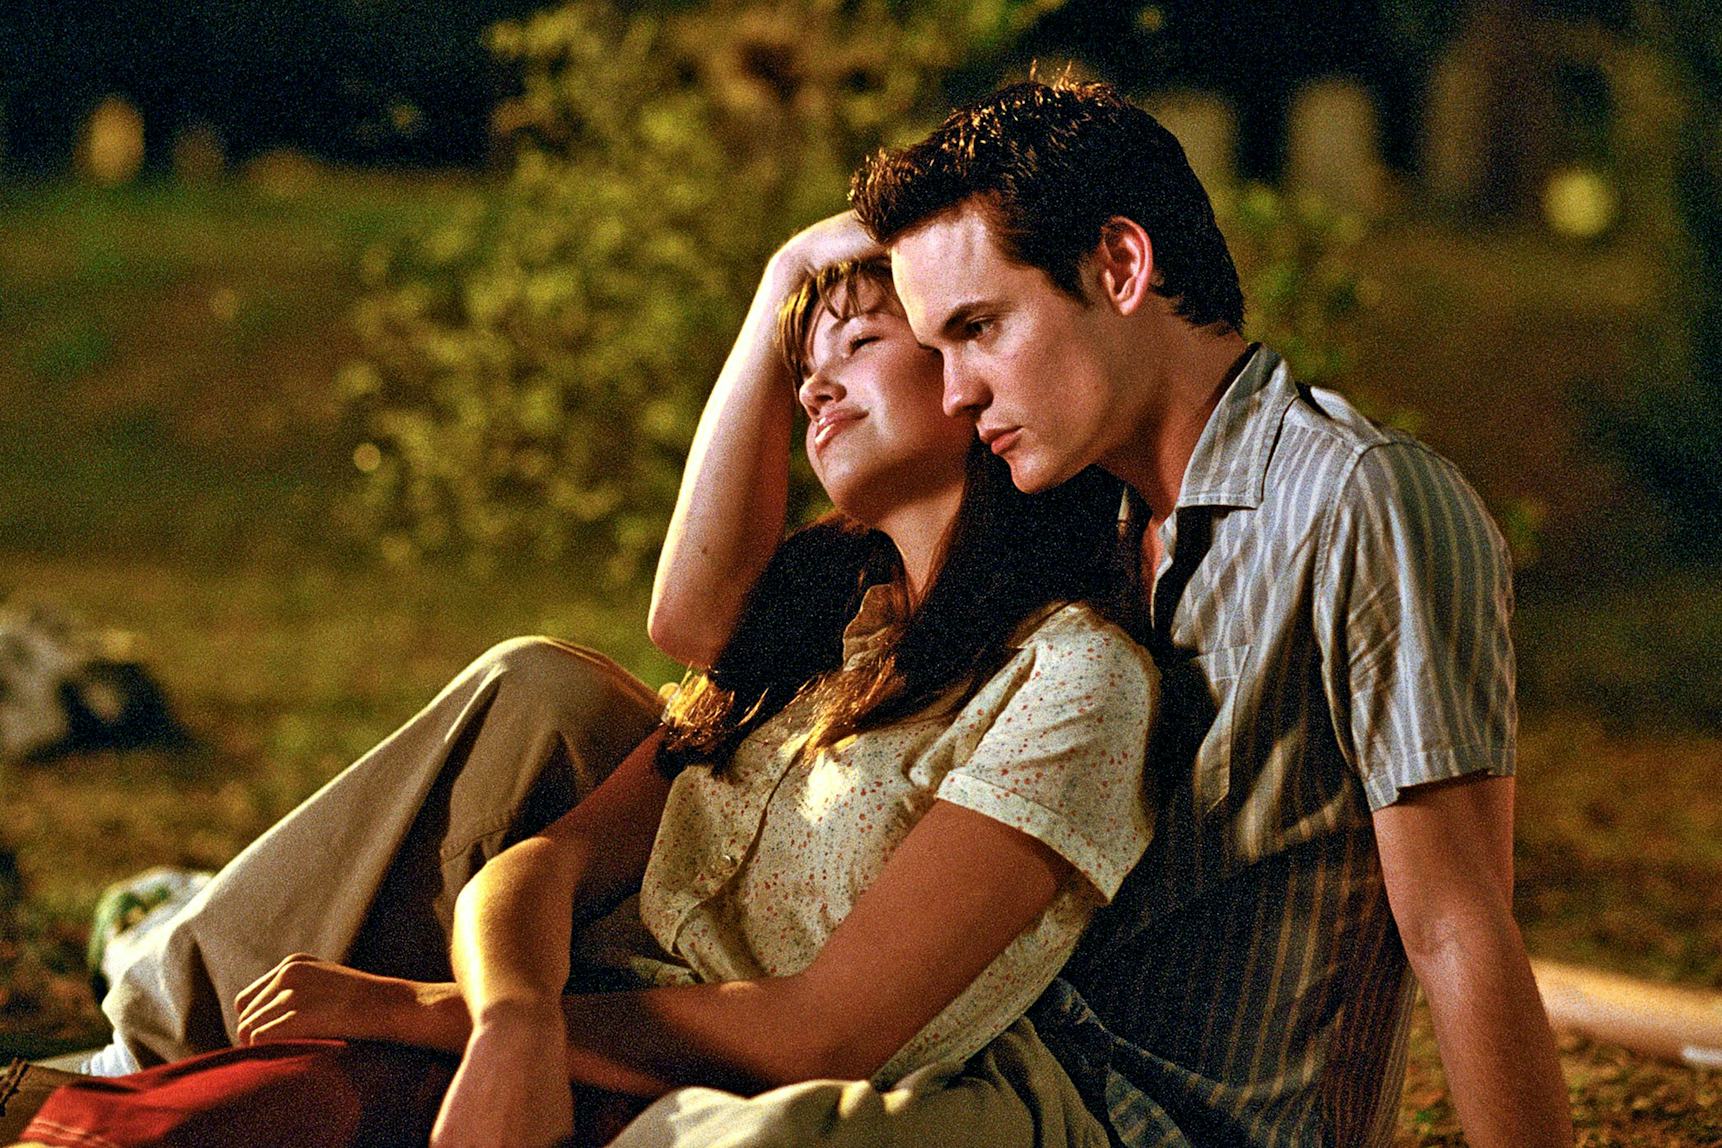 10 Sad Movies To Watch After A Breakup If You Feel Like You Just Need To Cry